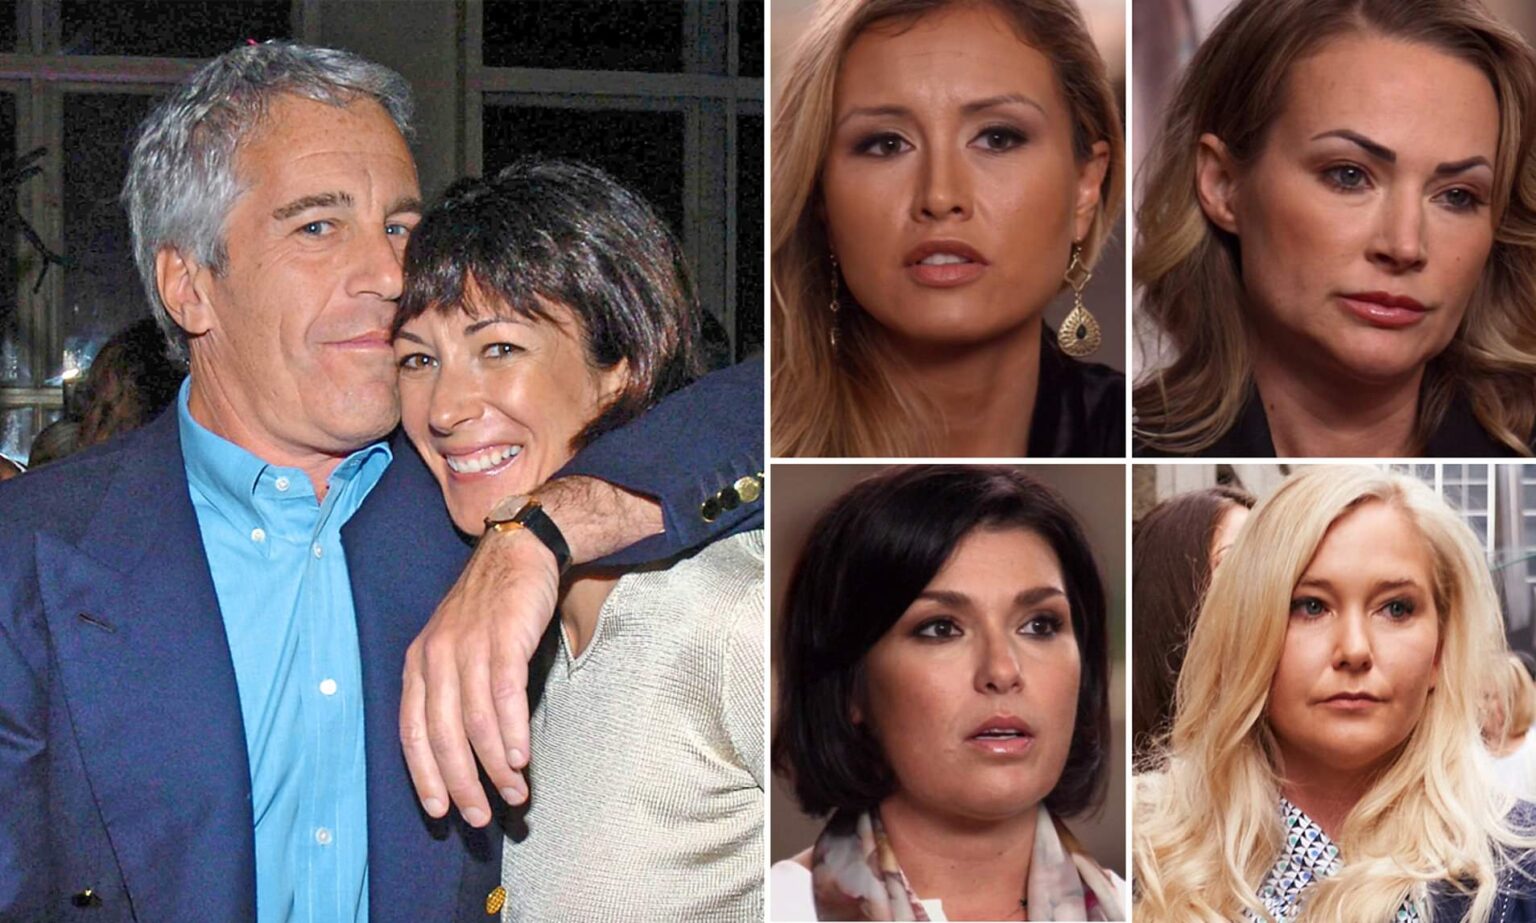 Ghislaine Maxwell and Jeffrey Epstein's victims may see some more justice. Learn how the 2008 plea deal with Epstein could be ruled unlawful soon.